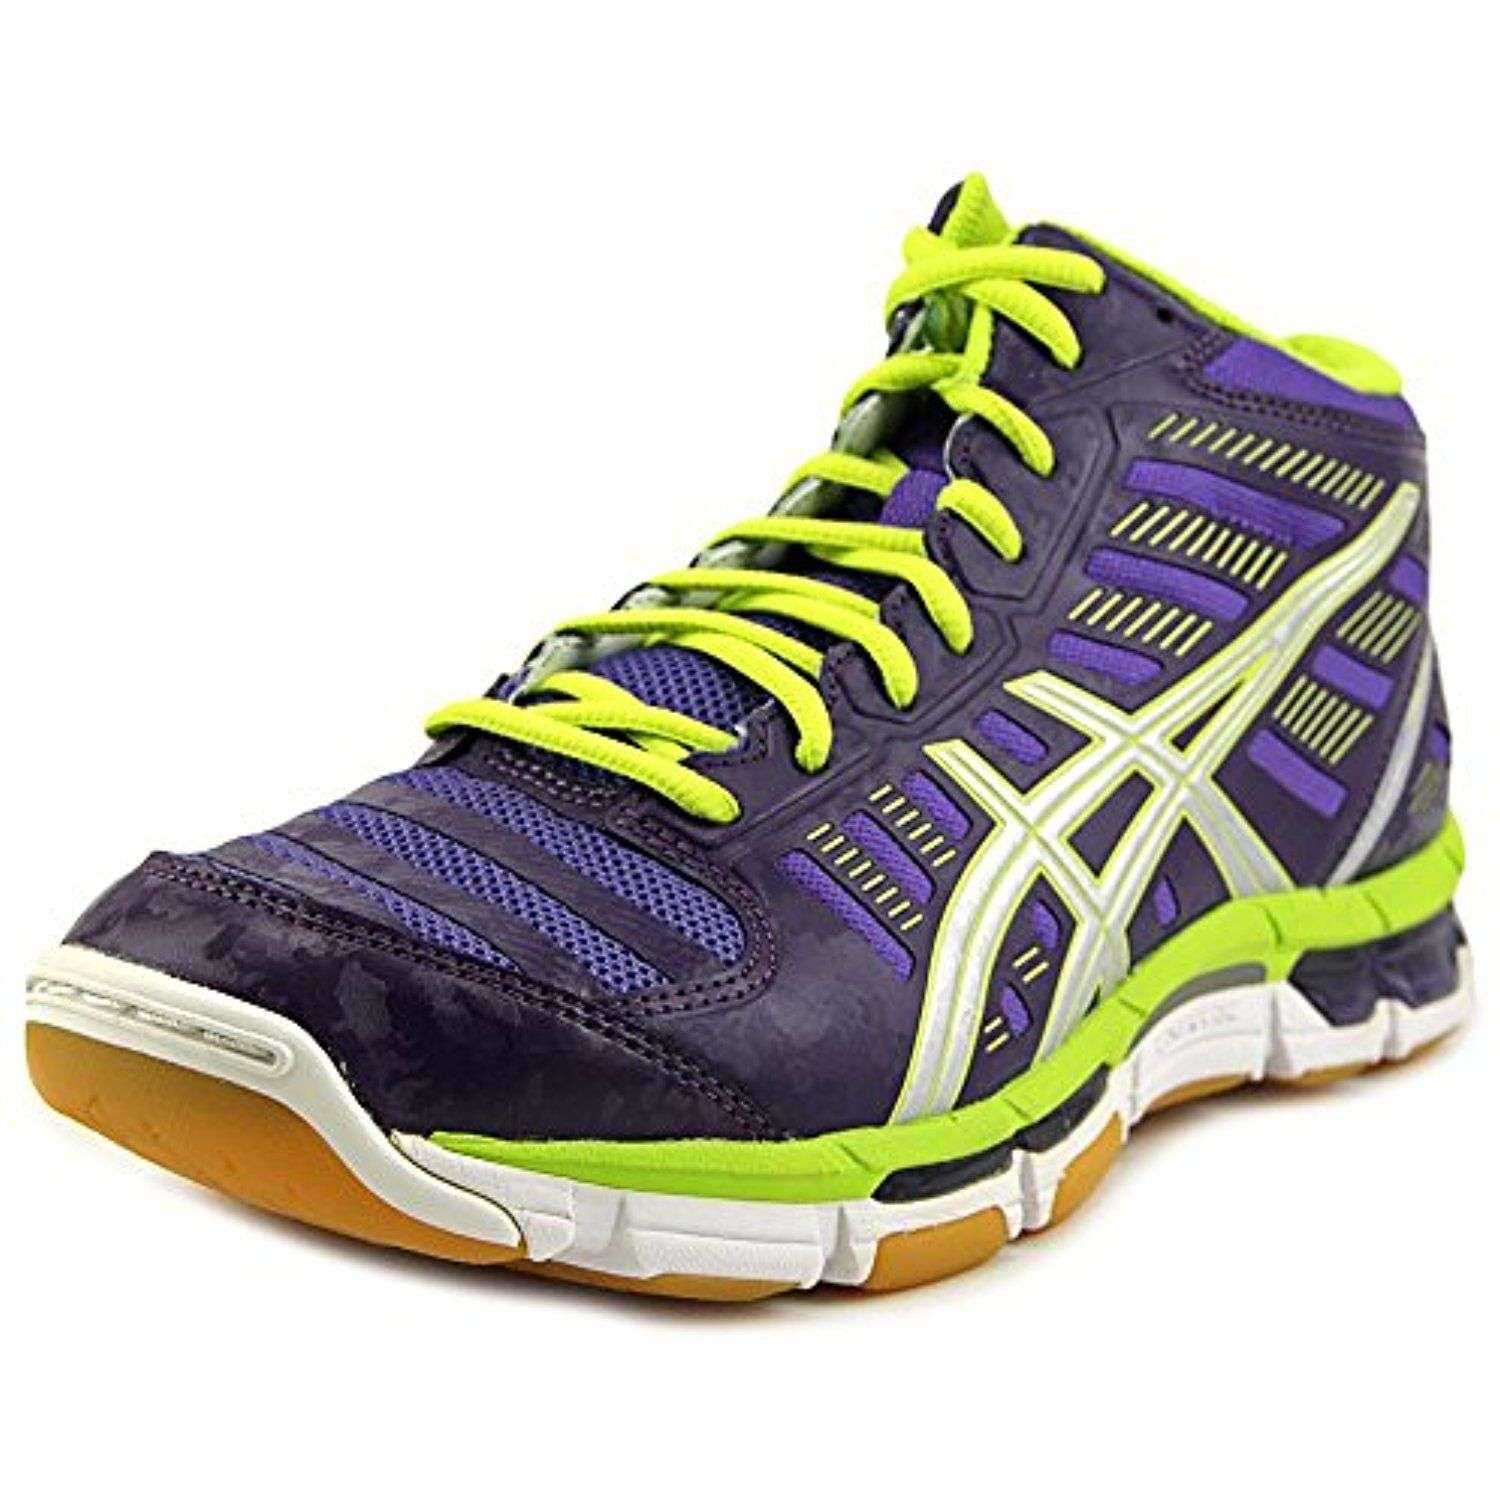 gelcyber shot mt womens volleyball shoe you can find